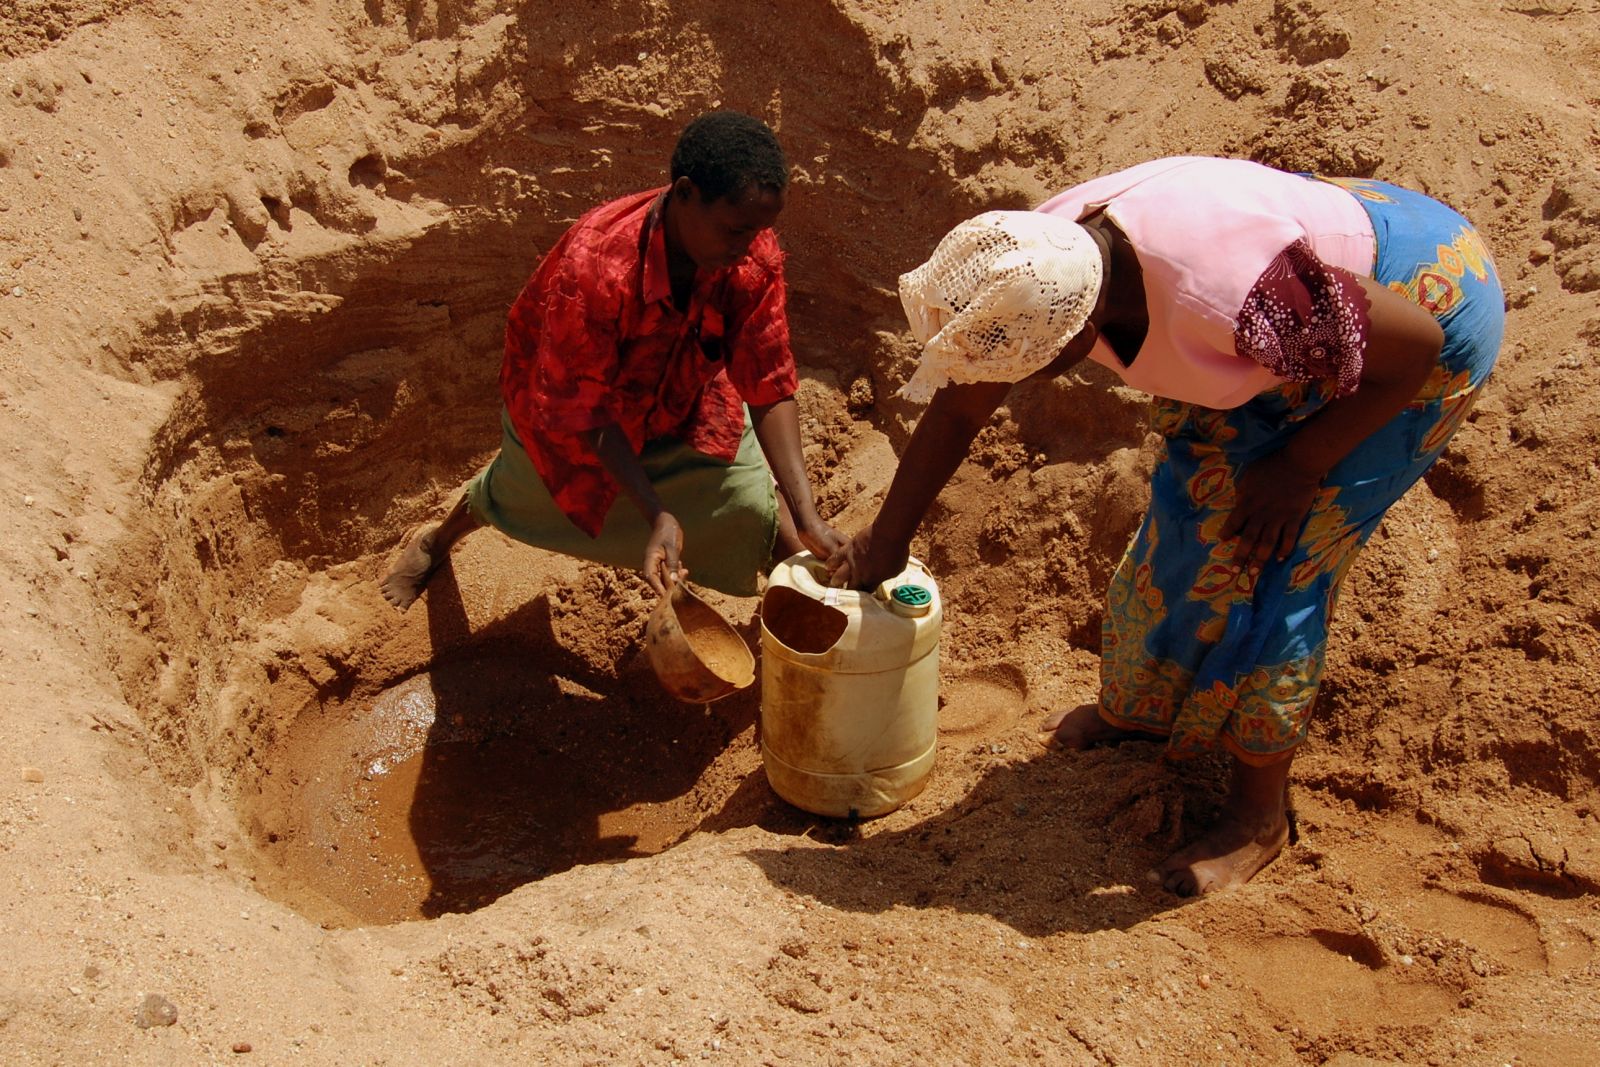 Kenyan women fetching water from a dry river bed in the Machakos region: drought impacts are gender specific.